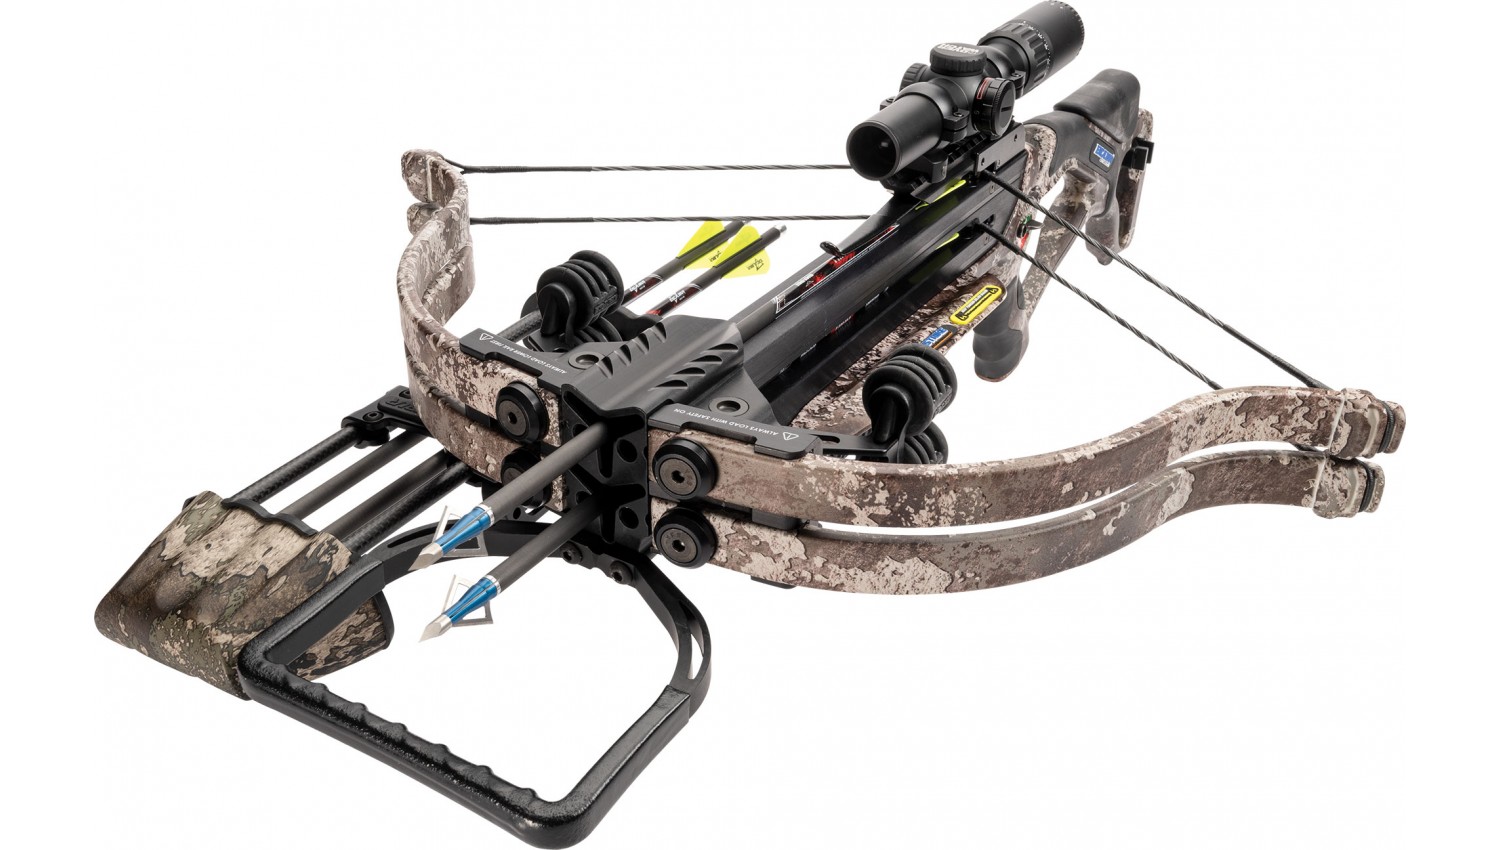 Excalibur TwinStrike Dual Fire Crossbow Package.